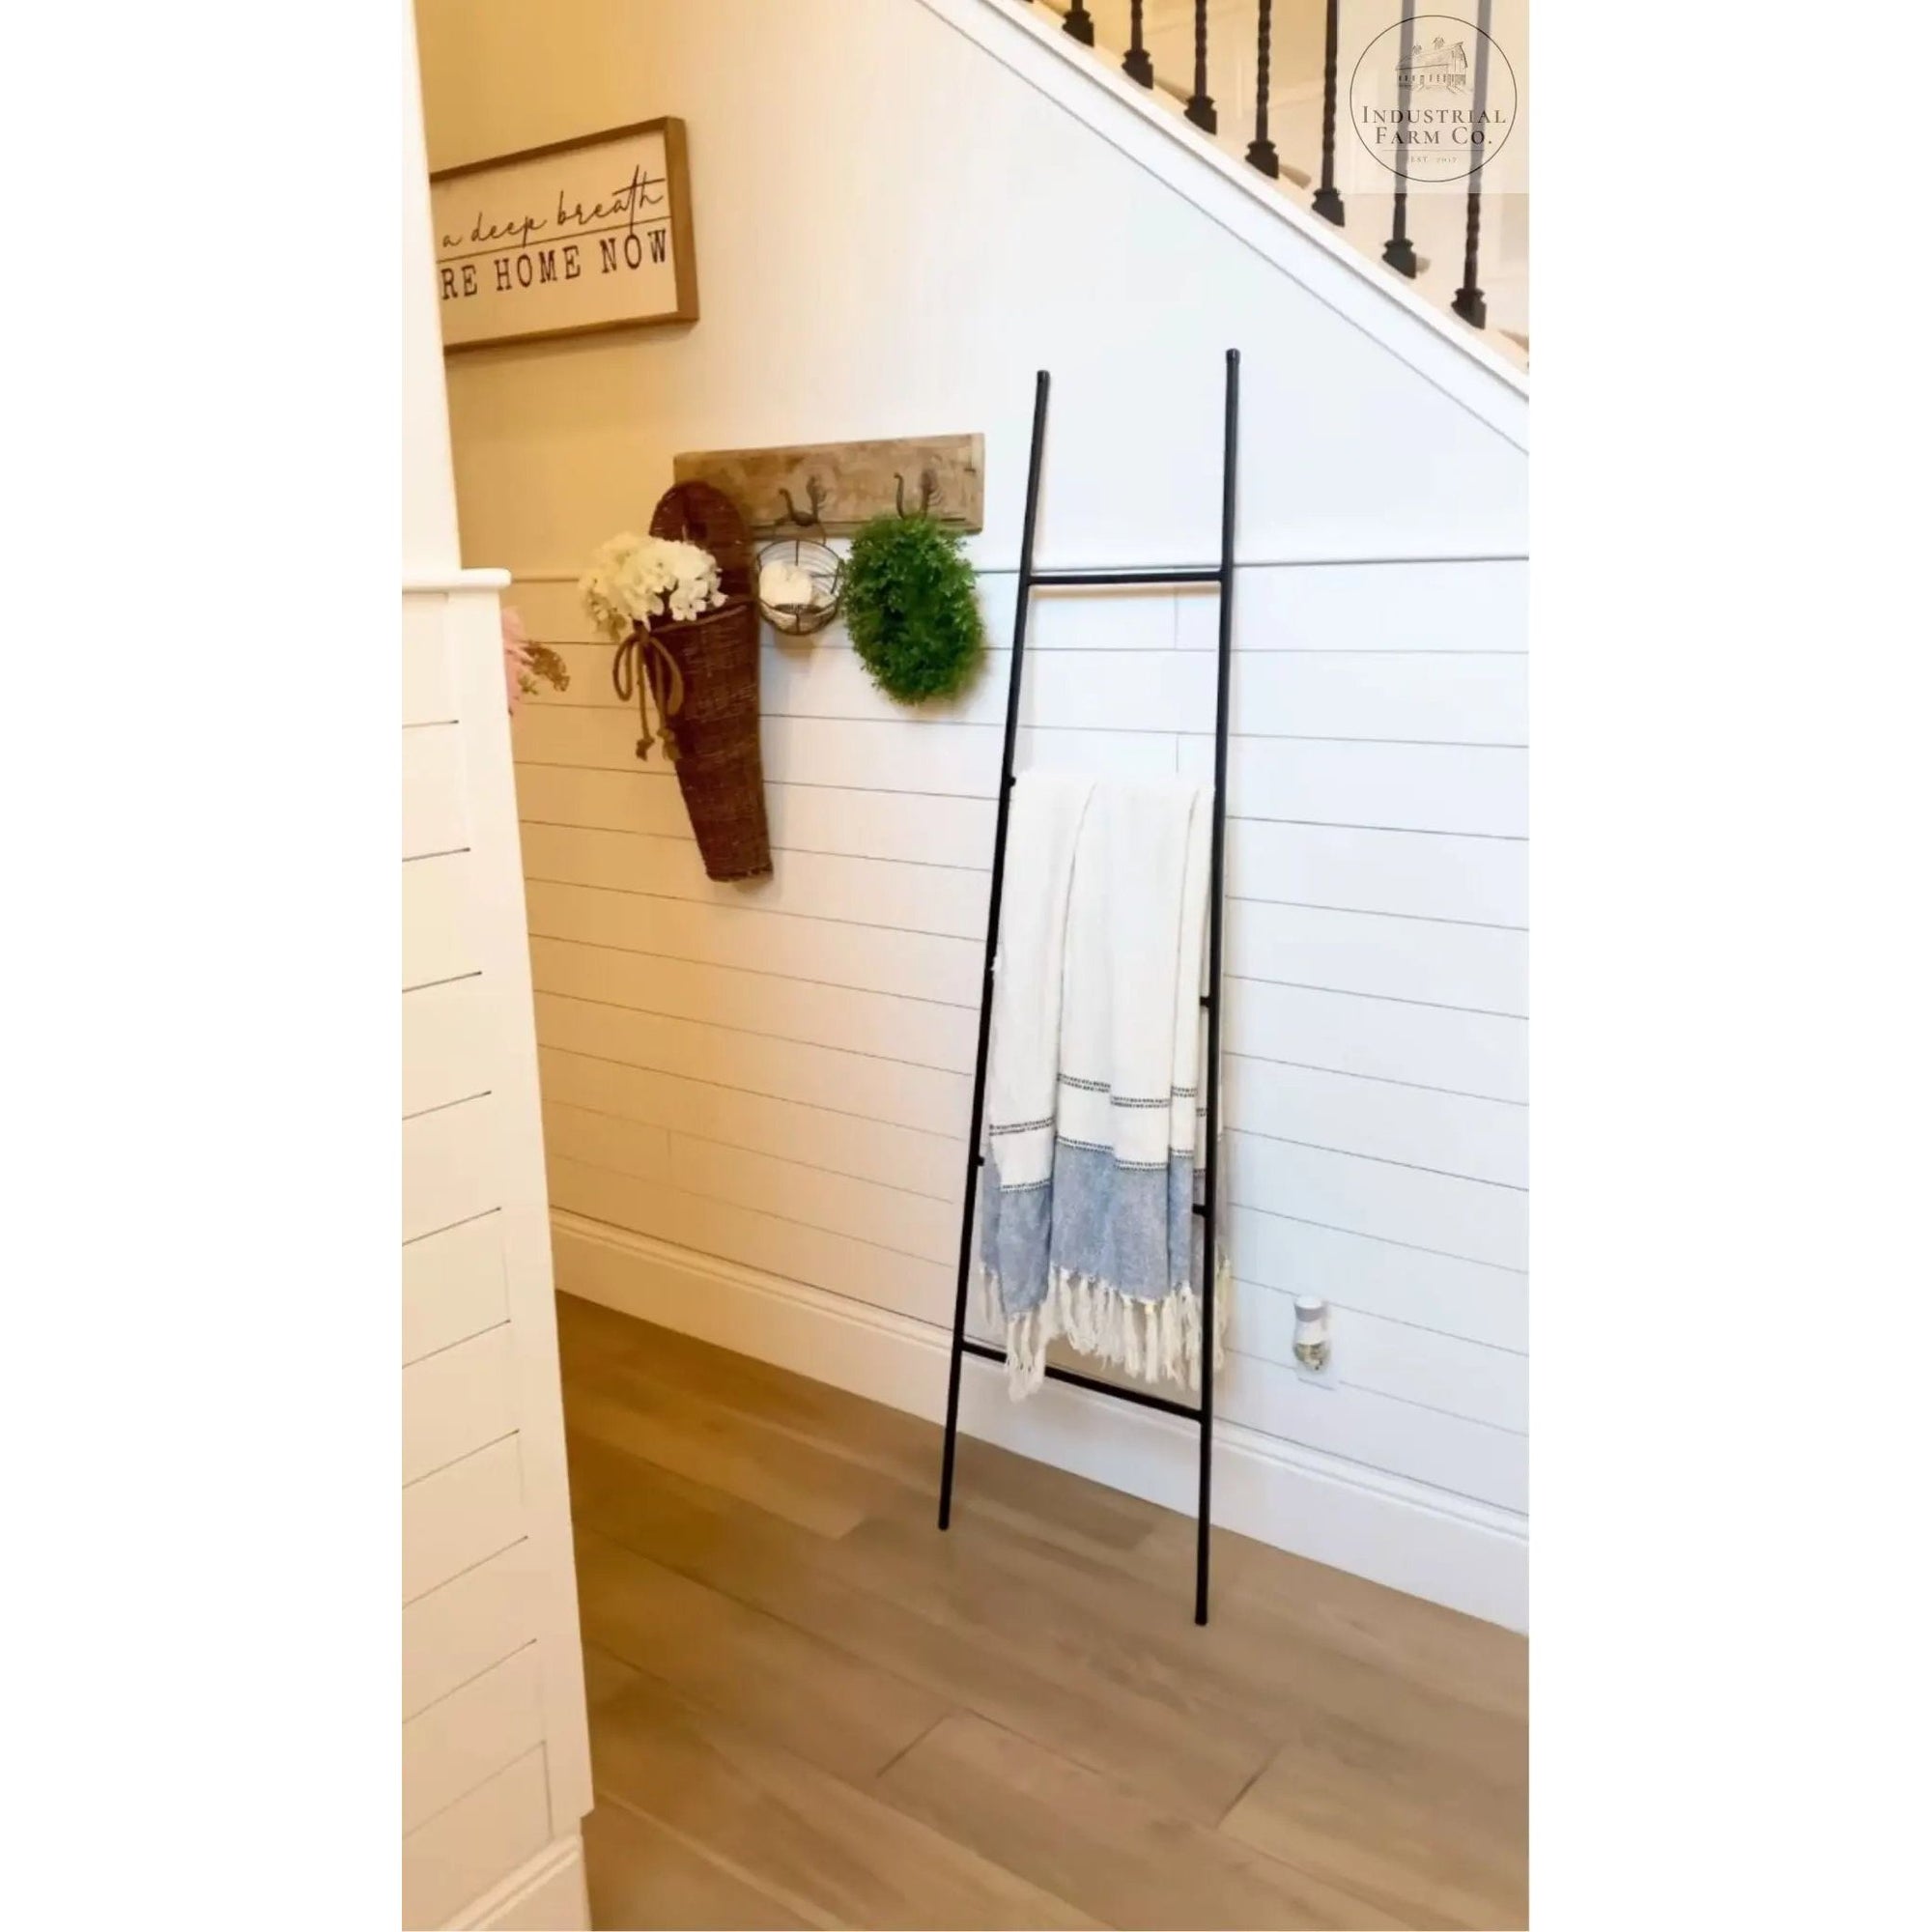 The Tapered Michael Farmhouse Ladder Decorative Ladder 4 ft Tall Finish Raw - Uncoated Metal | Industrial Farm Co